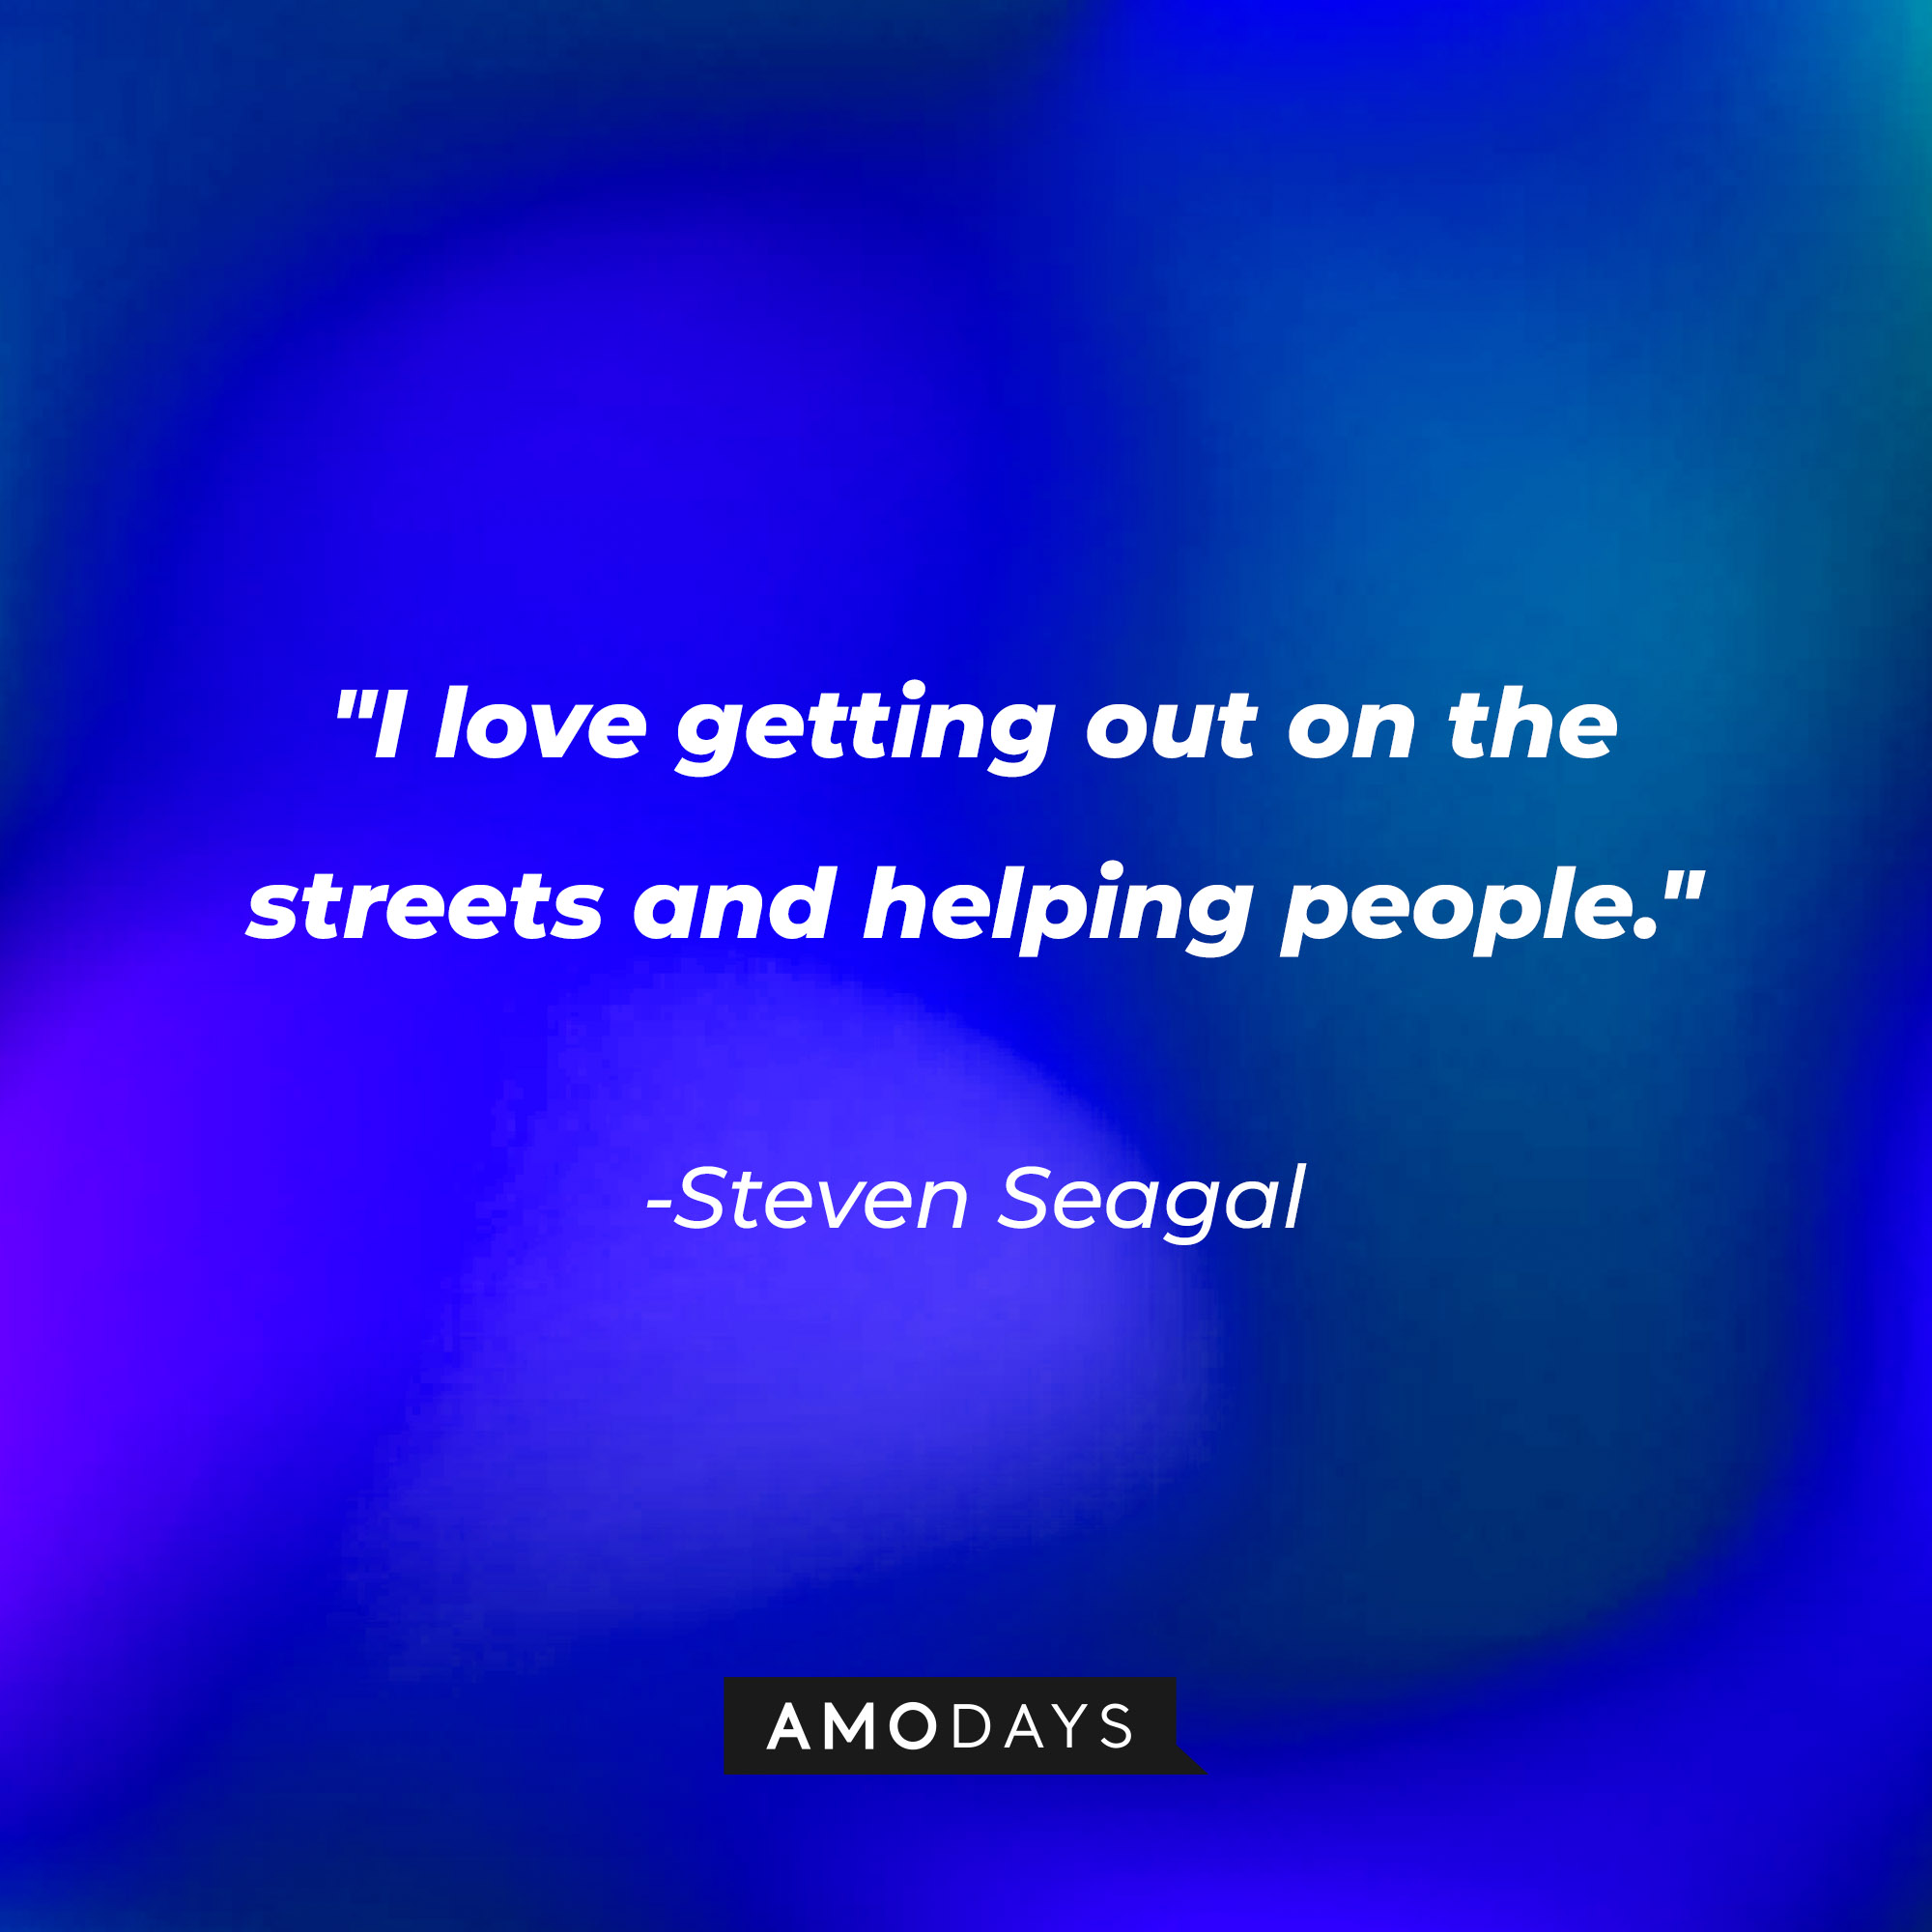 Steven Seagal’s quote: "I love getting out on the streets and helping people." | Image: AmoDays